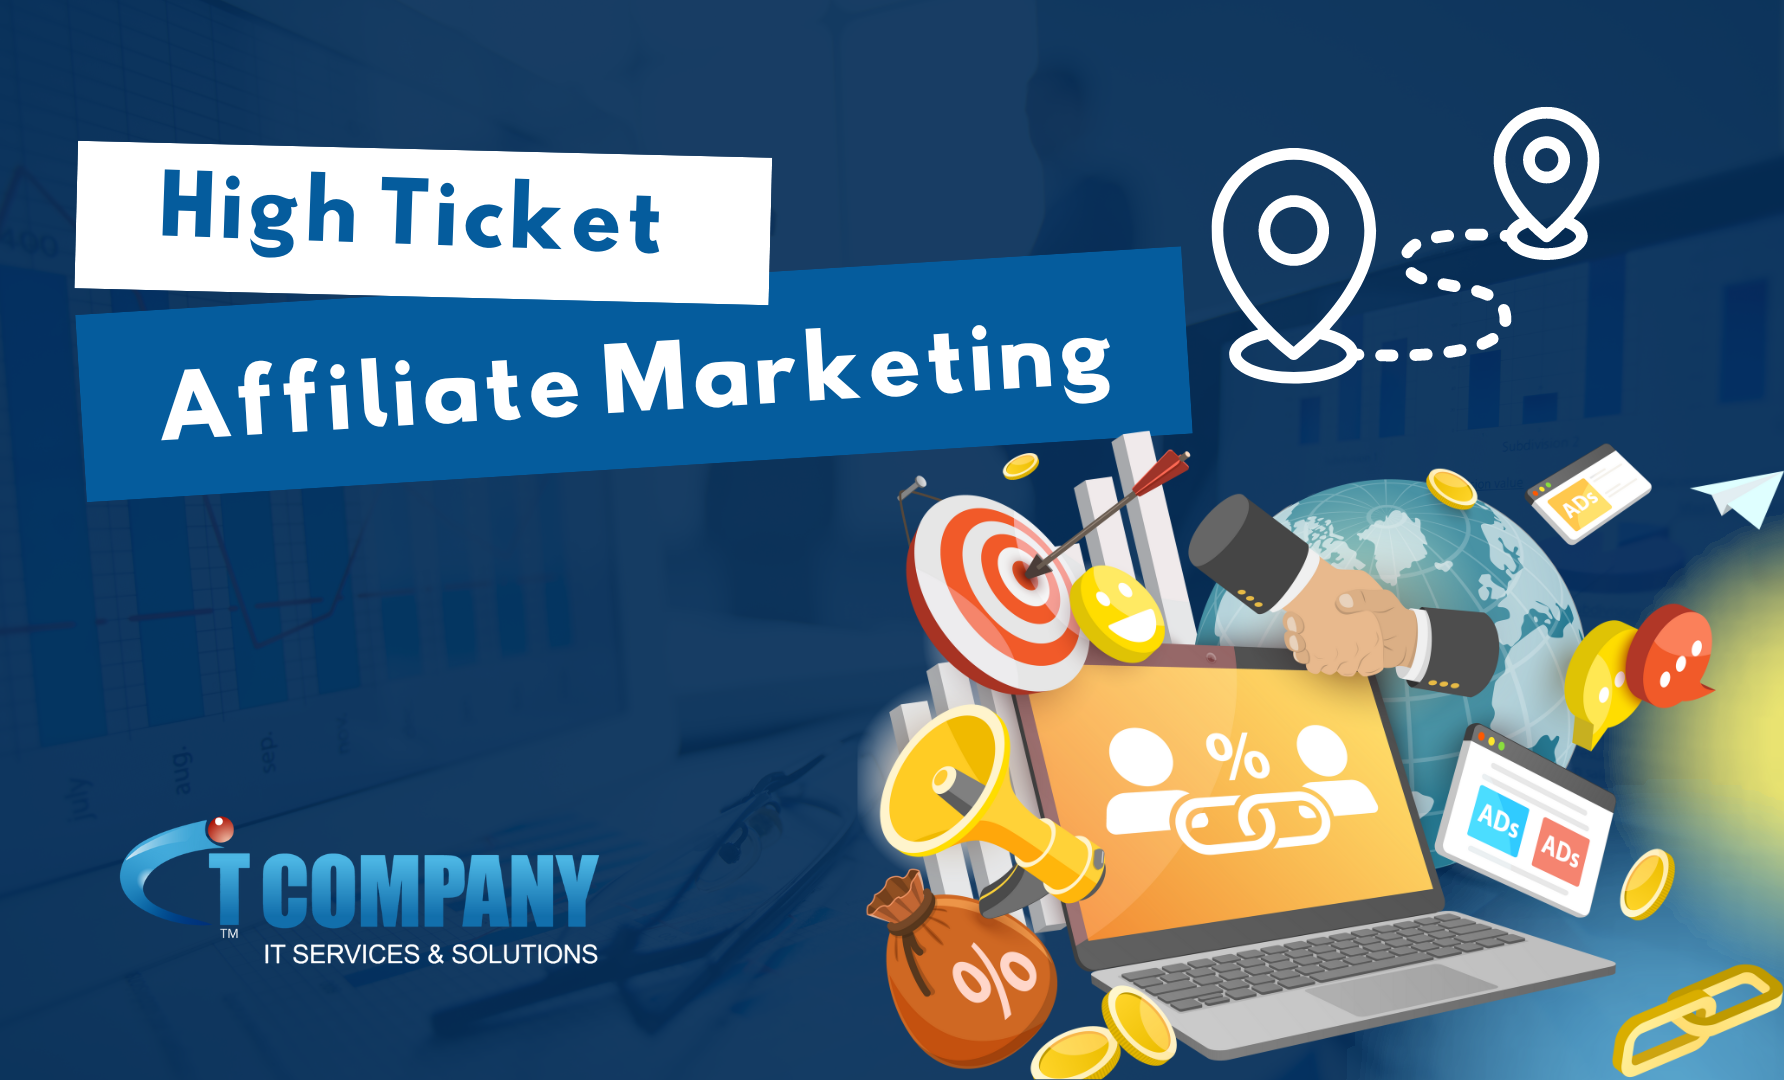 The Ultimate Guide to High Ticket Affiliate Marketing in Australia